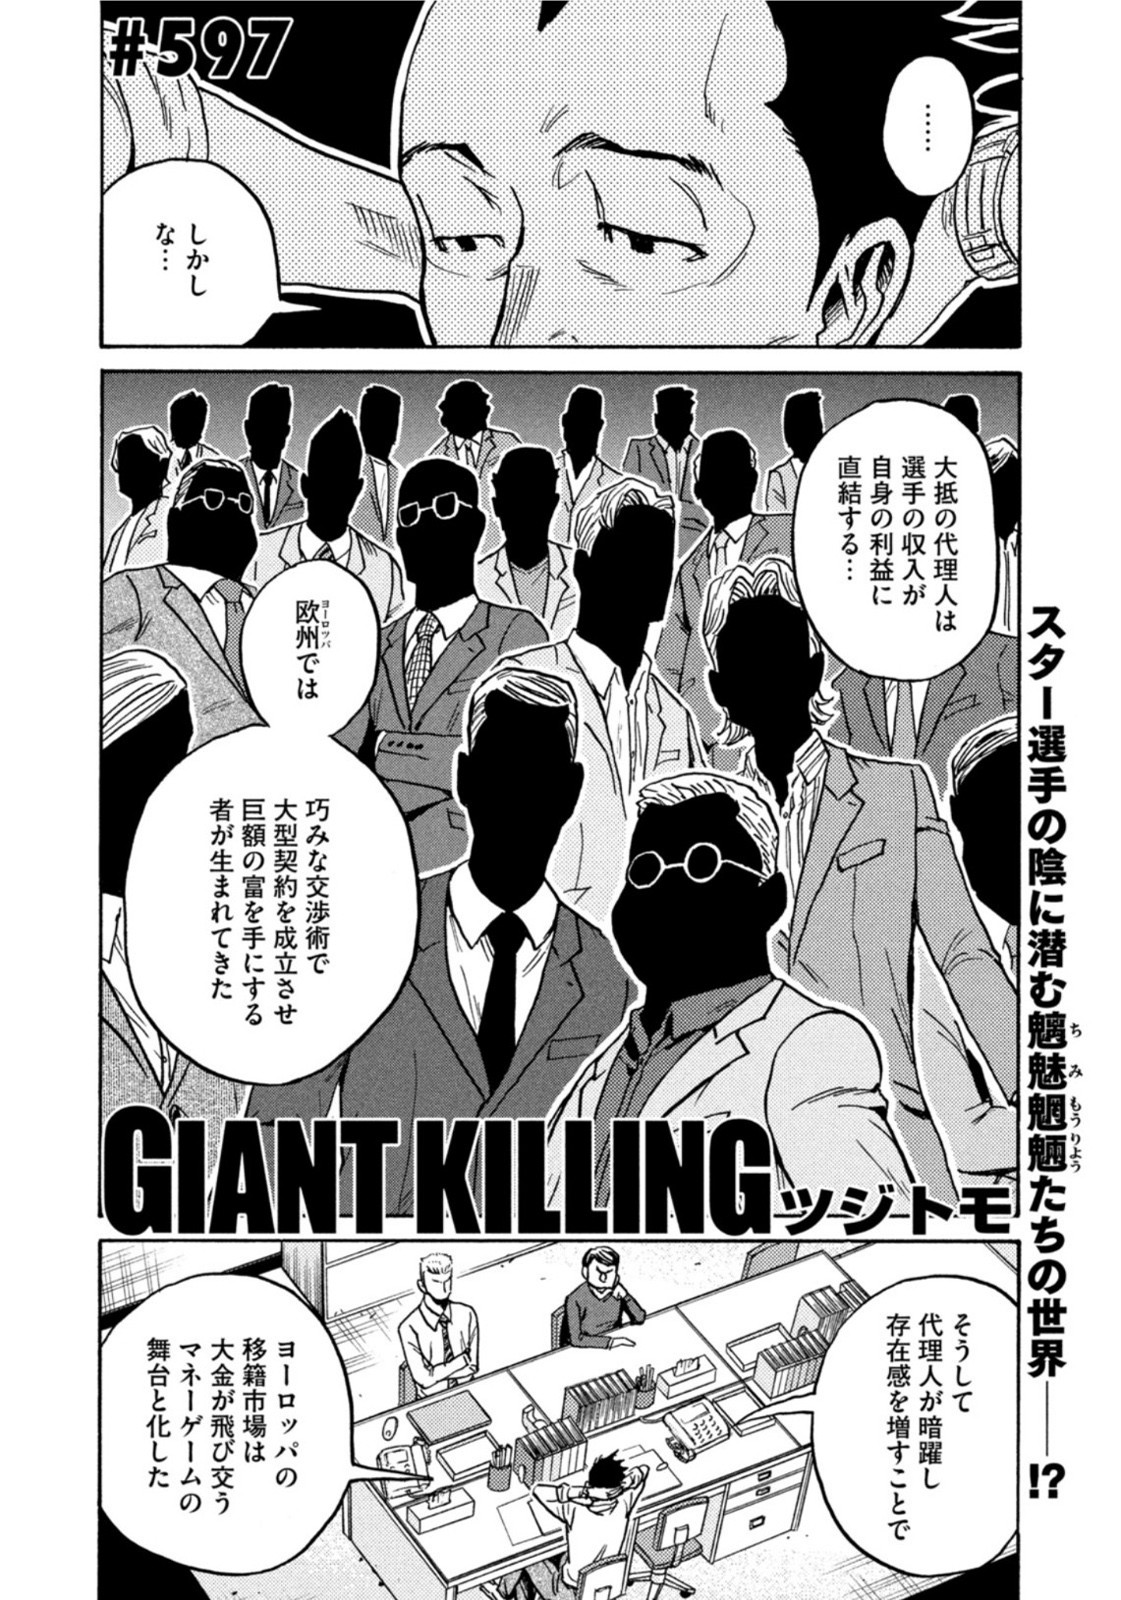 Giant Killing - Chapter 597 - Page 2